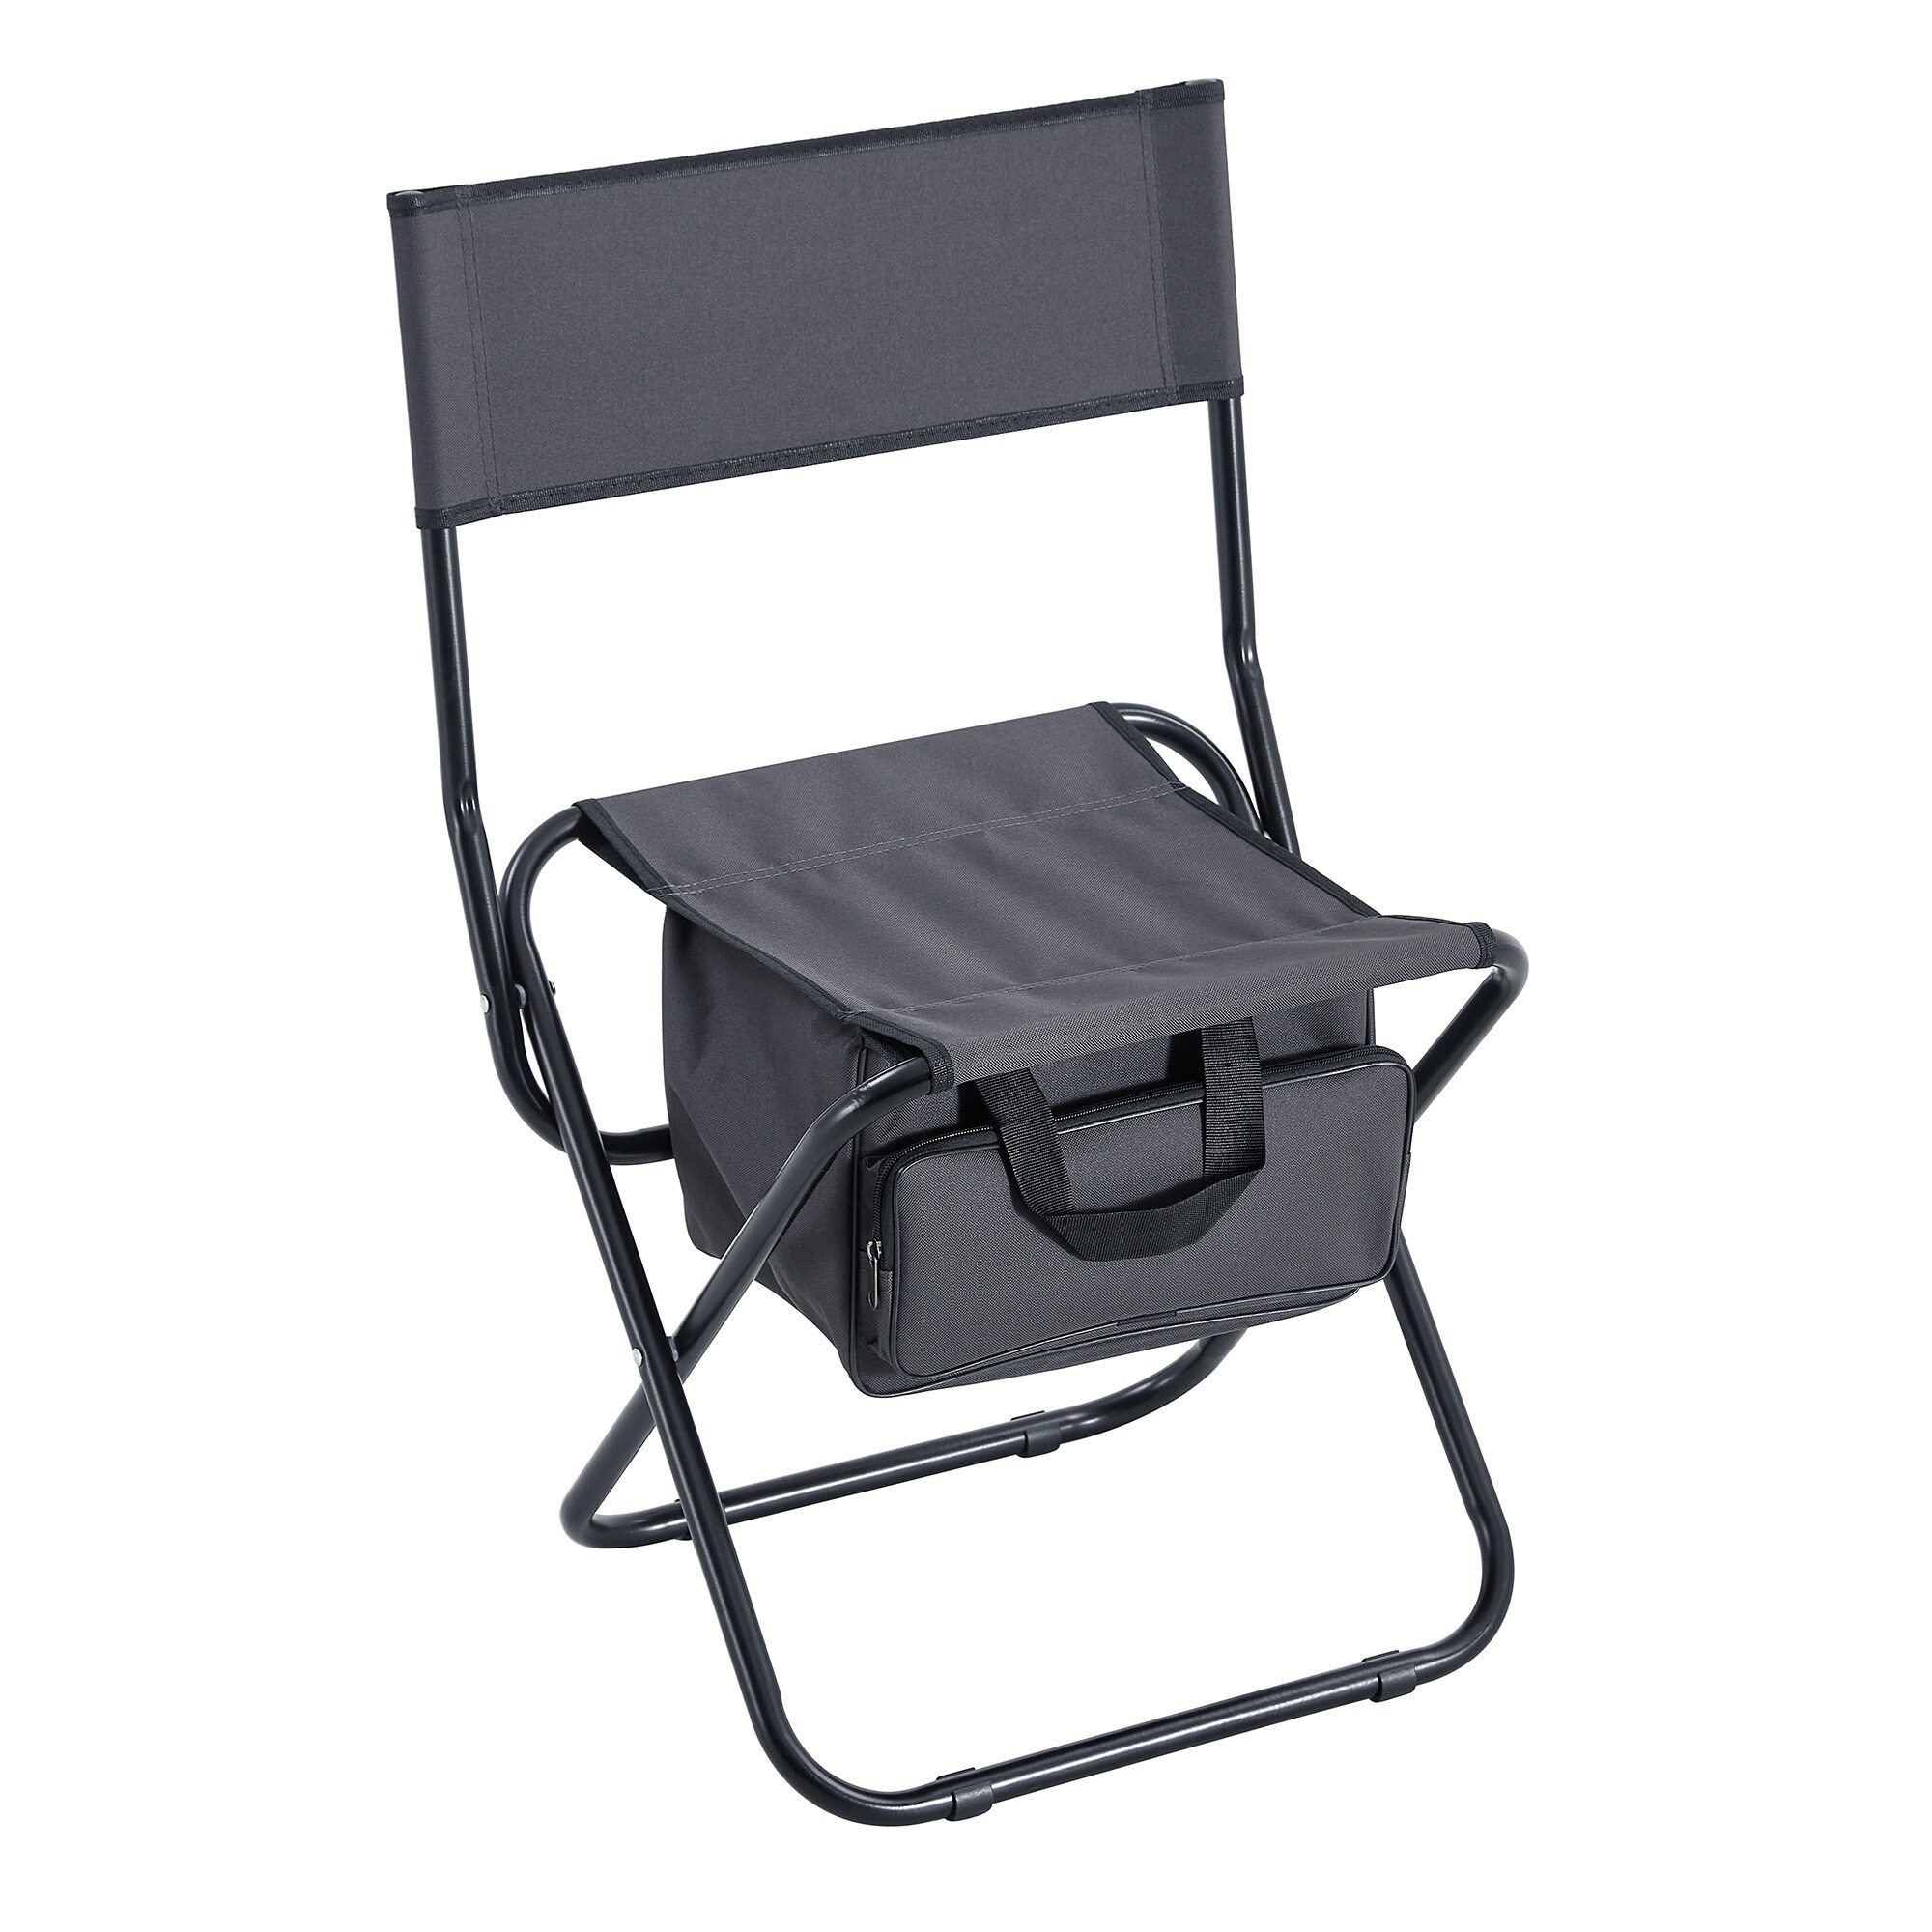 4-Piece Folding Outdoor Camping Chair with Storage Bag, Portable Chair for  Camping, Picnics & Fishing, 280 lbs Weight Capacity - Bed Bath & Beyond -  38911193